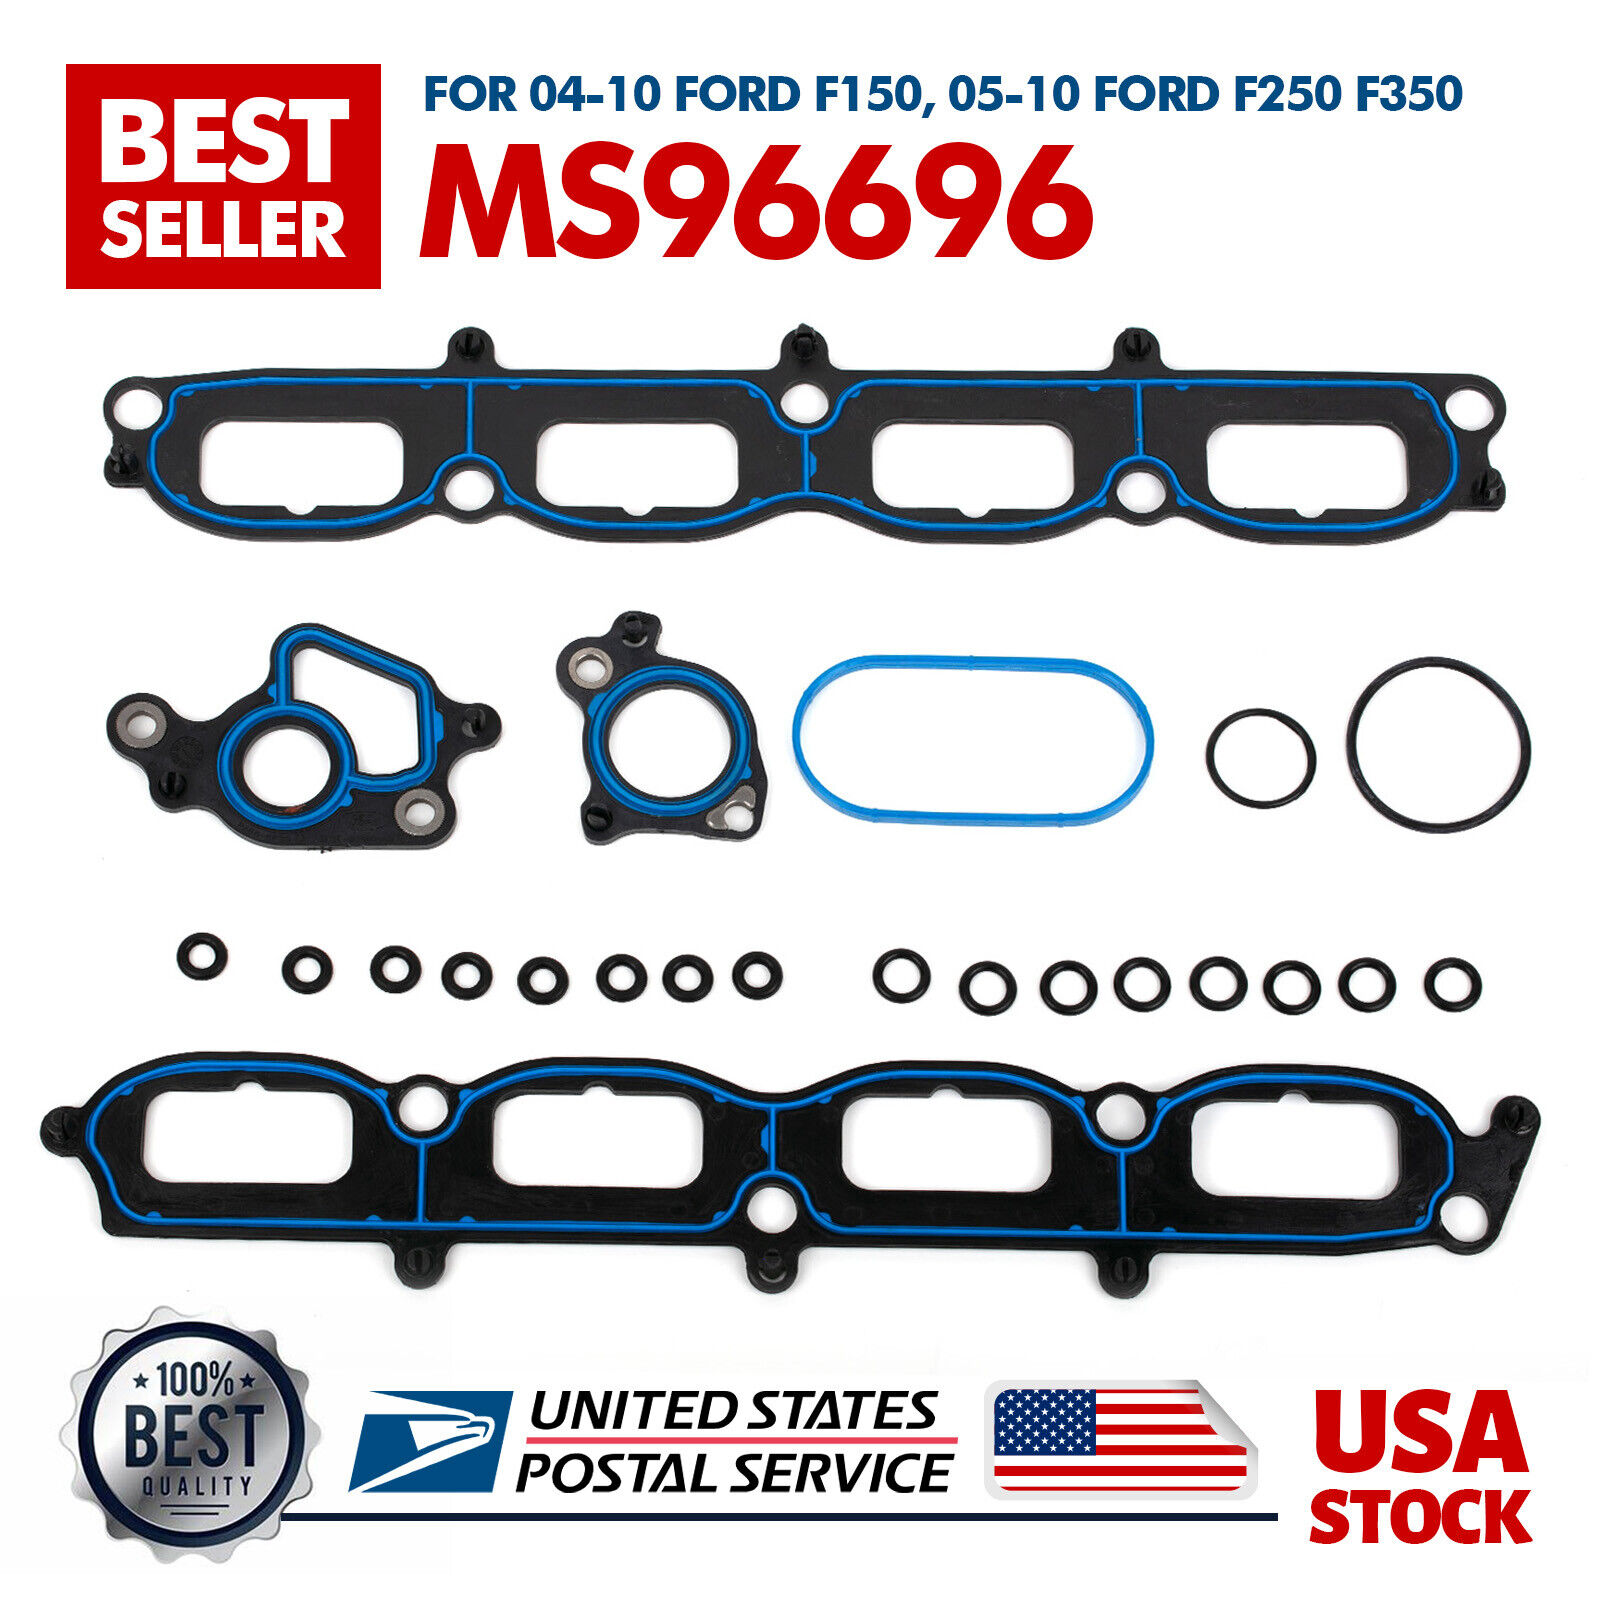 Intake Manifold Gasket Kit For Ford Expedition F-150 F-250 Lincoln Mark LT 04-14